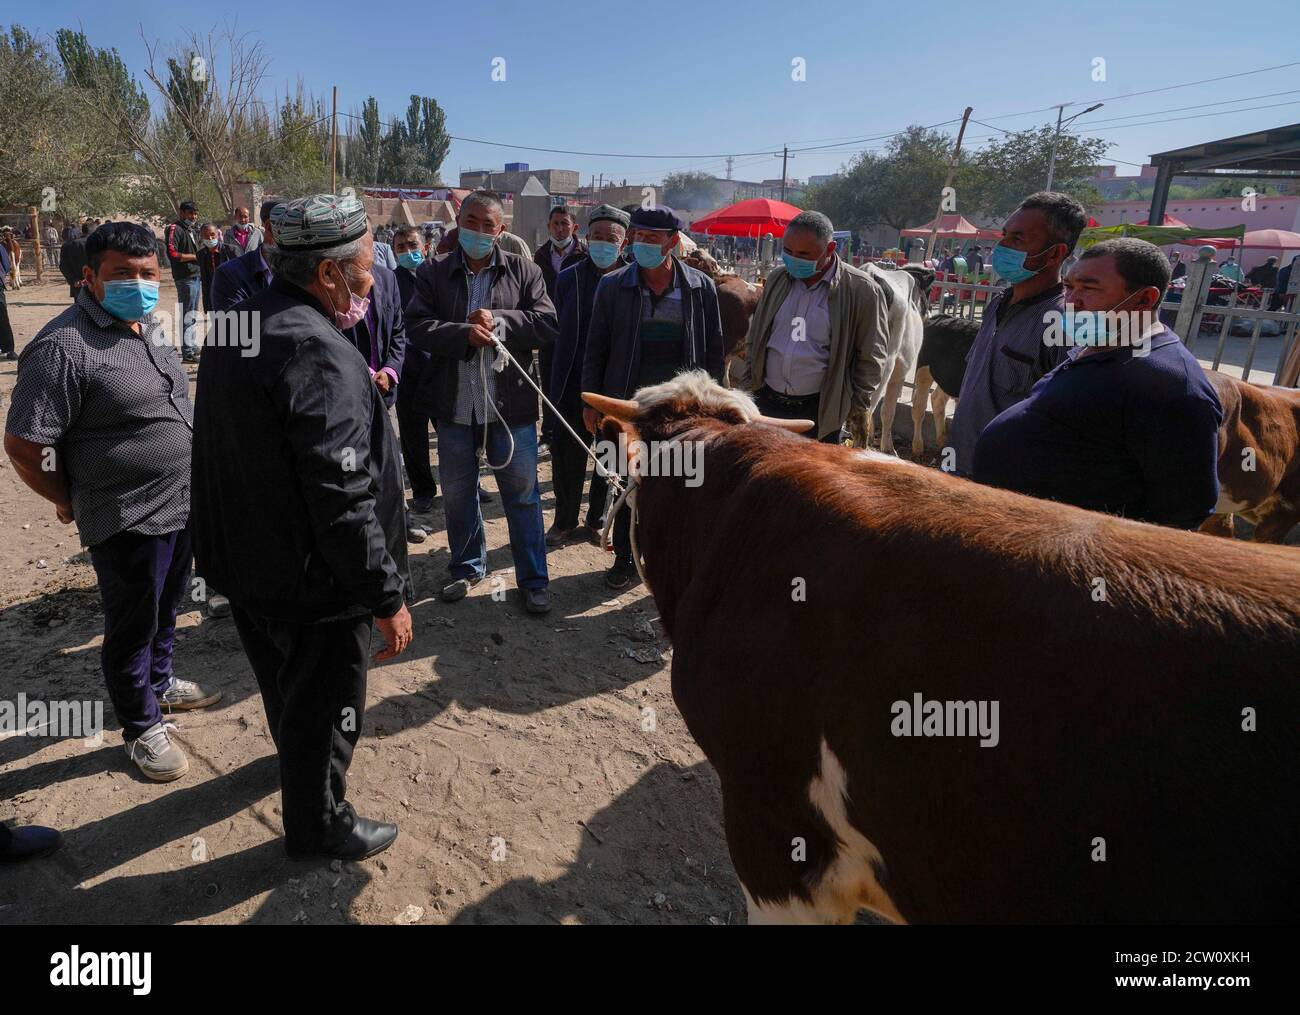 Shufu, China's Xinjiang Uygur Autonomous Region. 21st Sep, 2020. Villagers purchase cattle at a bazaar in a town of Shufu County, northwest China's Xinjiang Uygur Autonomous Region, Sept. 21, 2020. A cattle and sheep bazaar is held at the town in Shufu. Credit: Zhao Ge/Xinhua/Alamy Live News Stock Photo